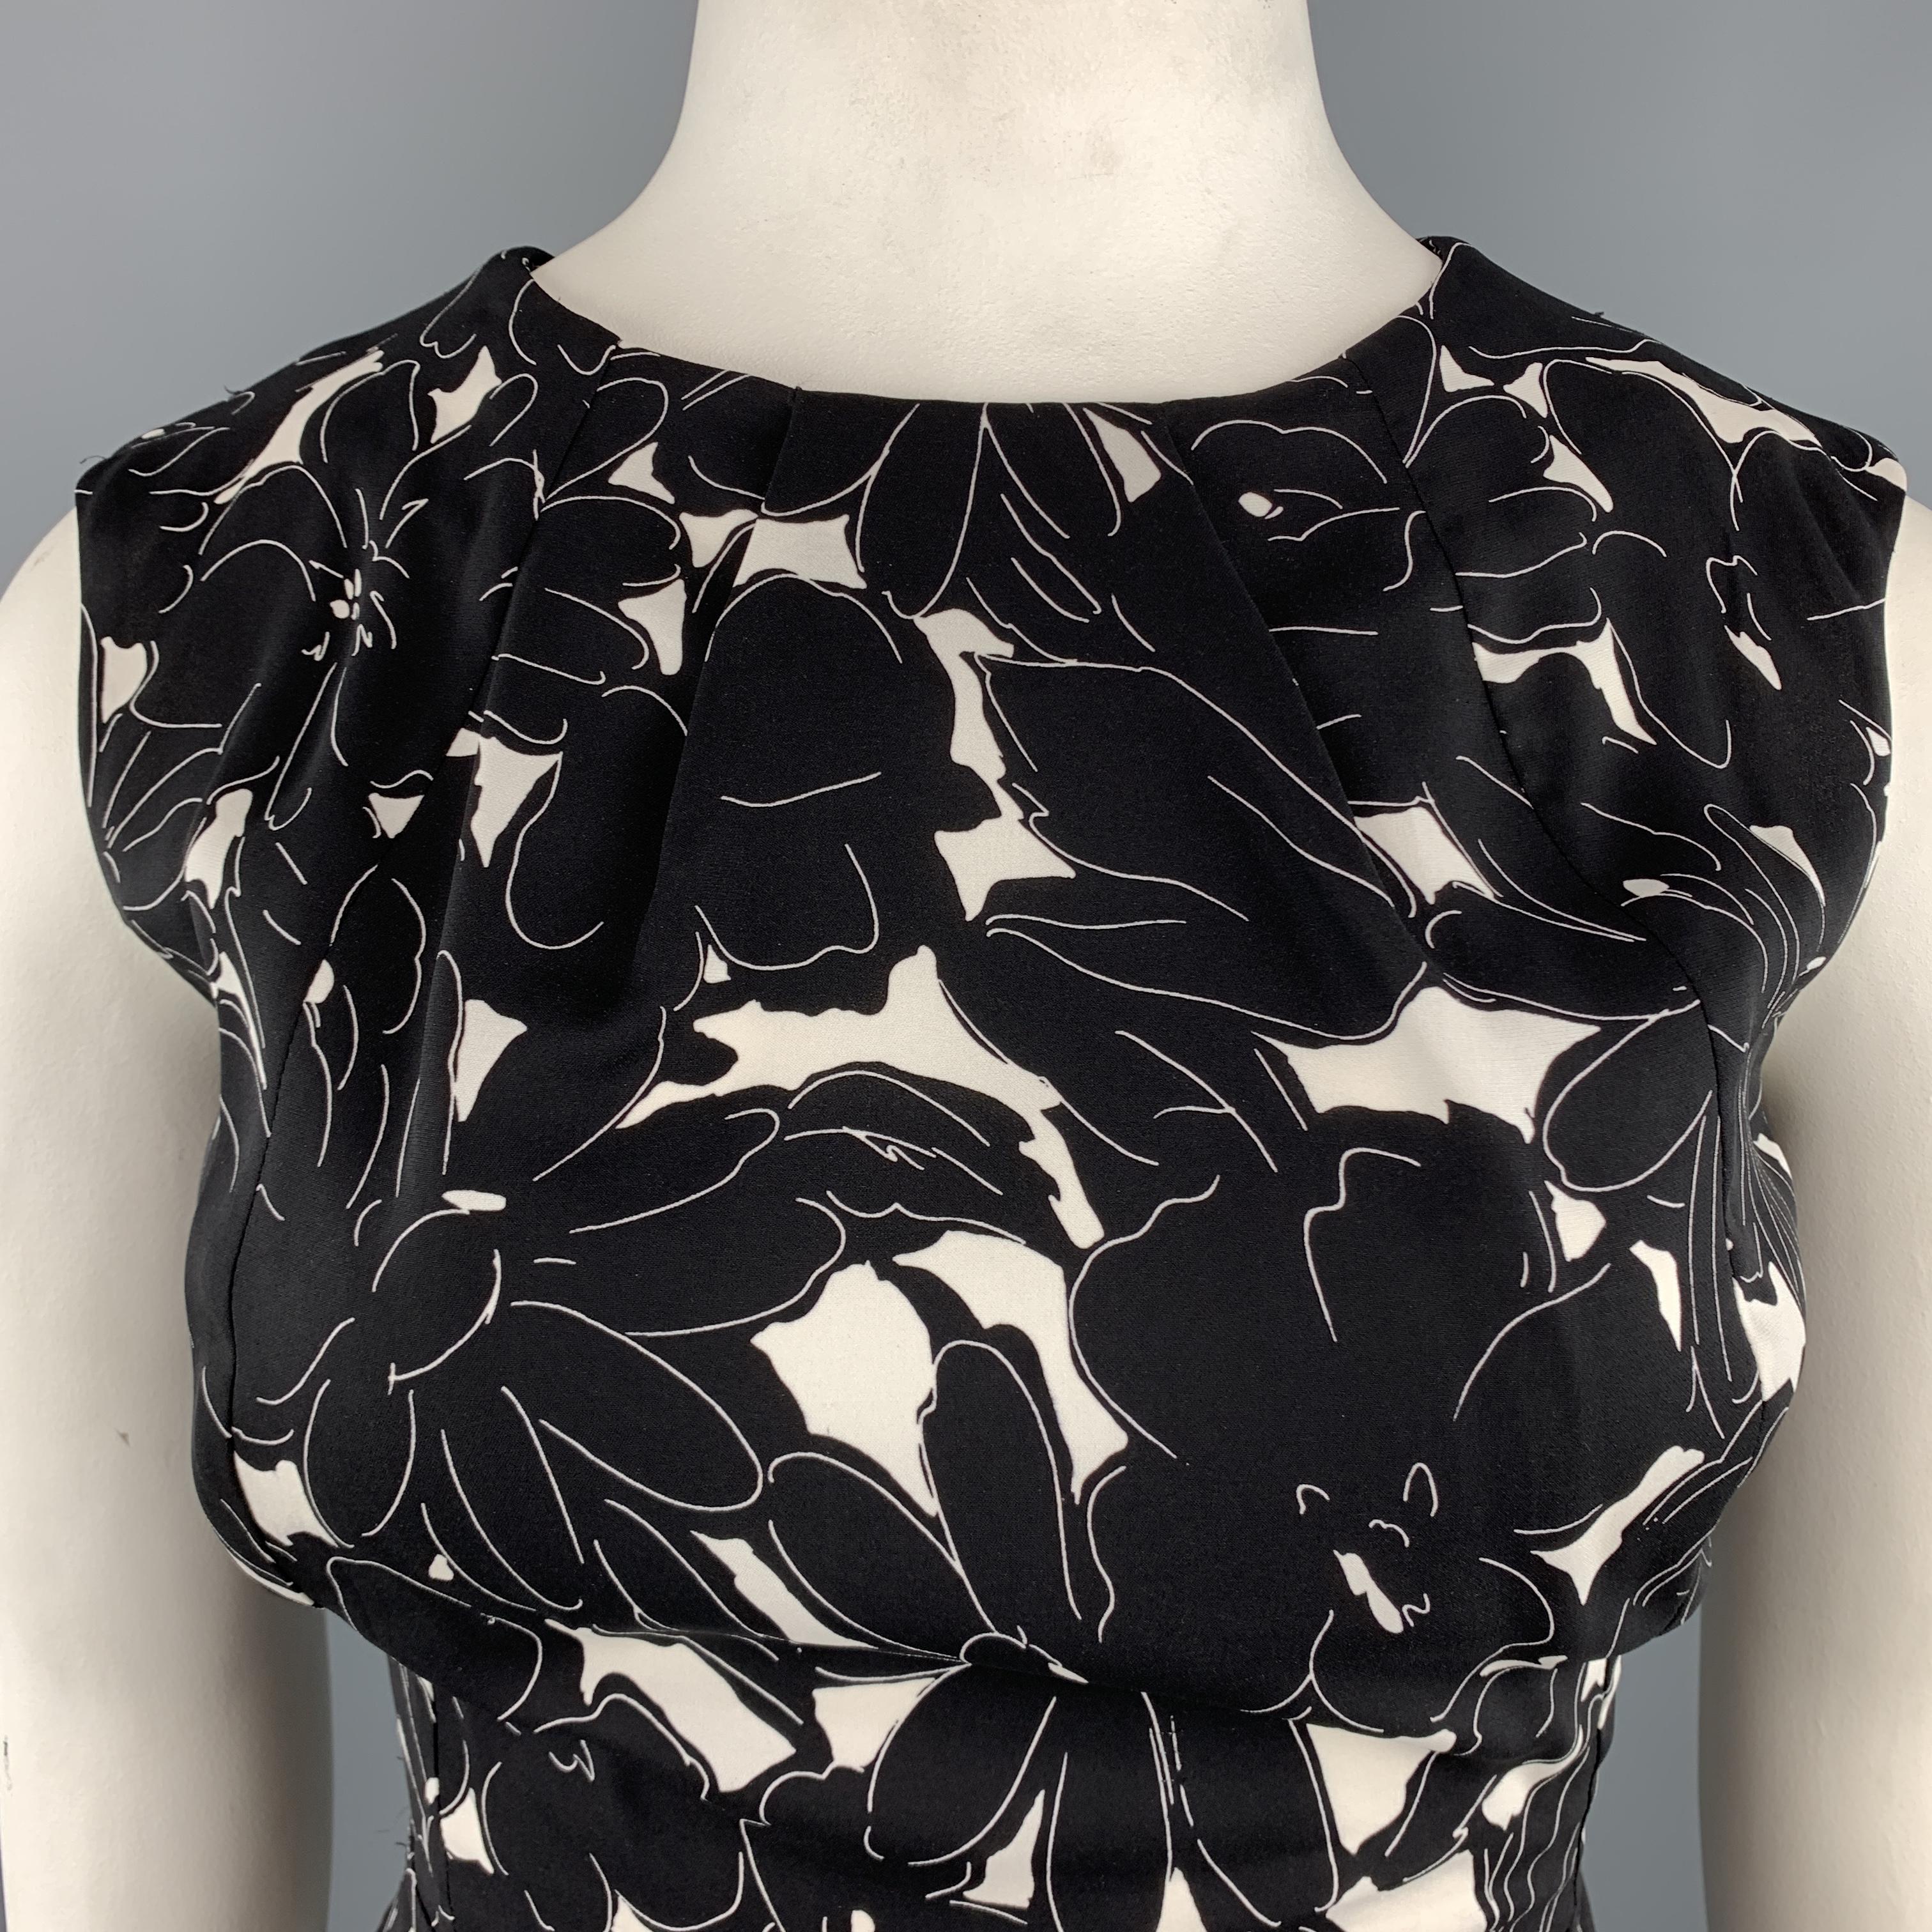 OSCAR DE LA RENTA sleeveless shift dress comes in black and white floral print stretch silk jersey with a round pleated neckline and pencil skirt with pleats. Made in Italy.

Excellent Pre-Owned Condition.
Marked: 14

Measurements:

l	Shoulder: 16